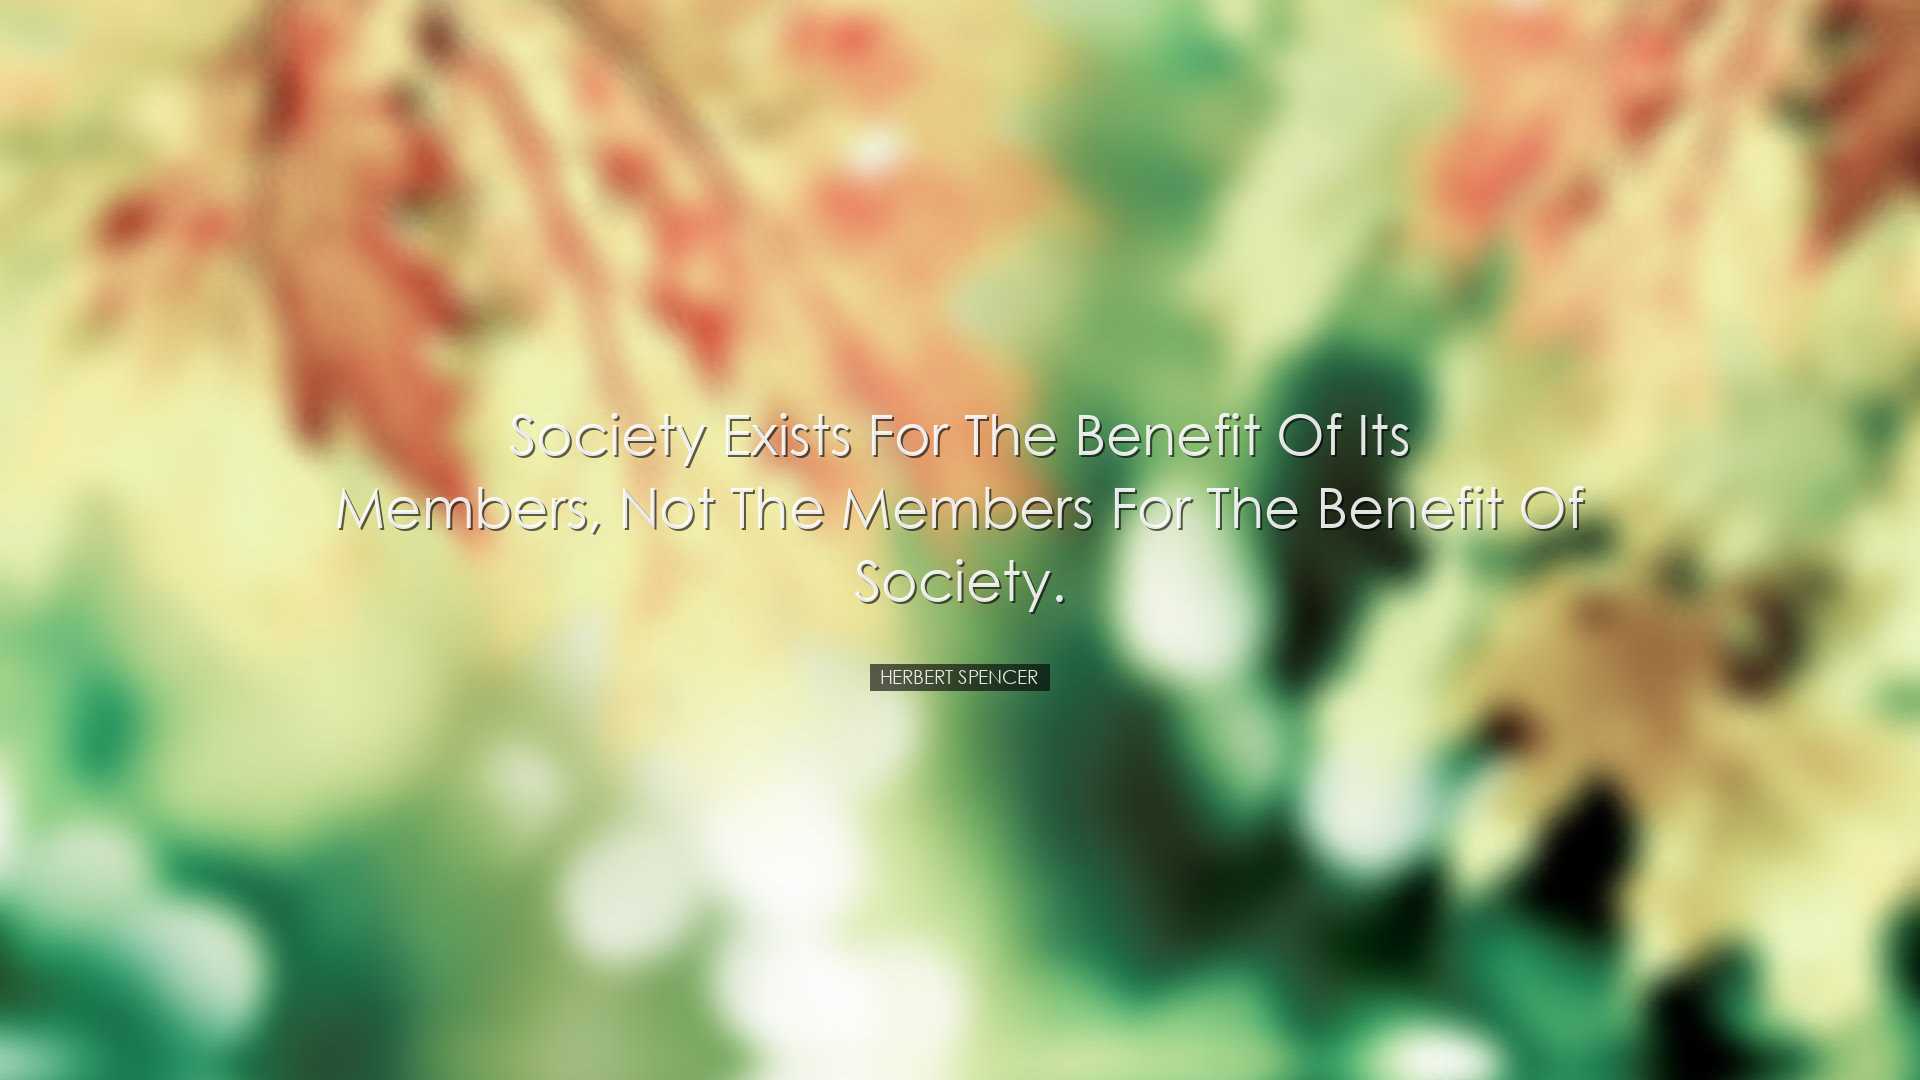 Society exists for the benefit of its members, not the members for